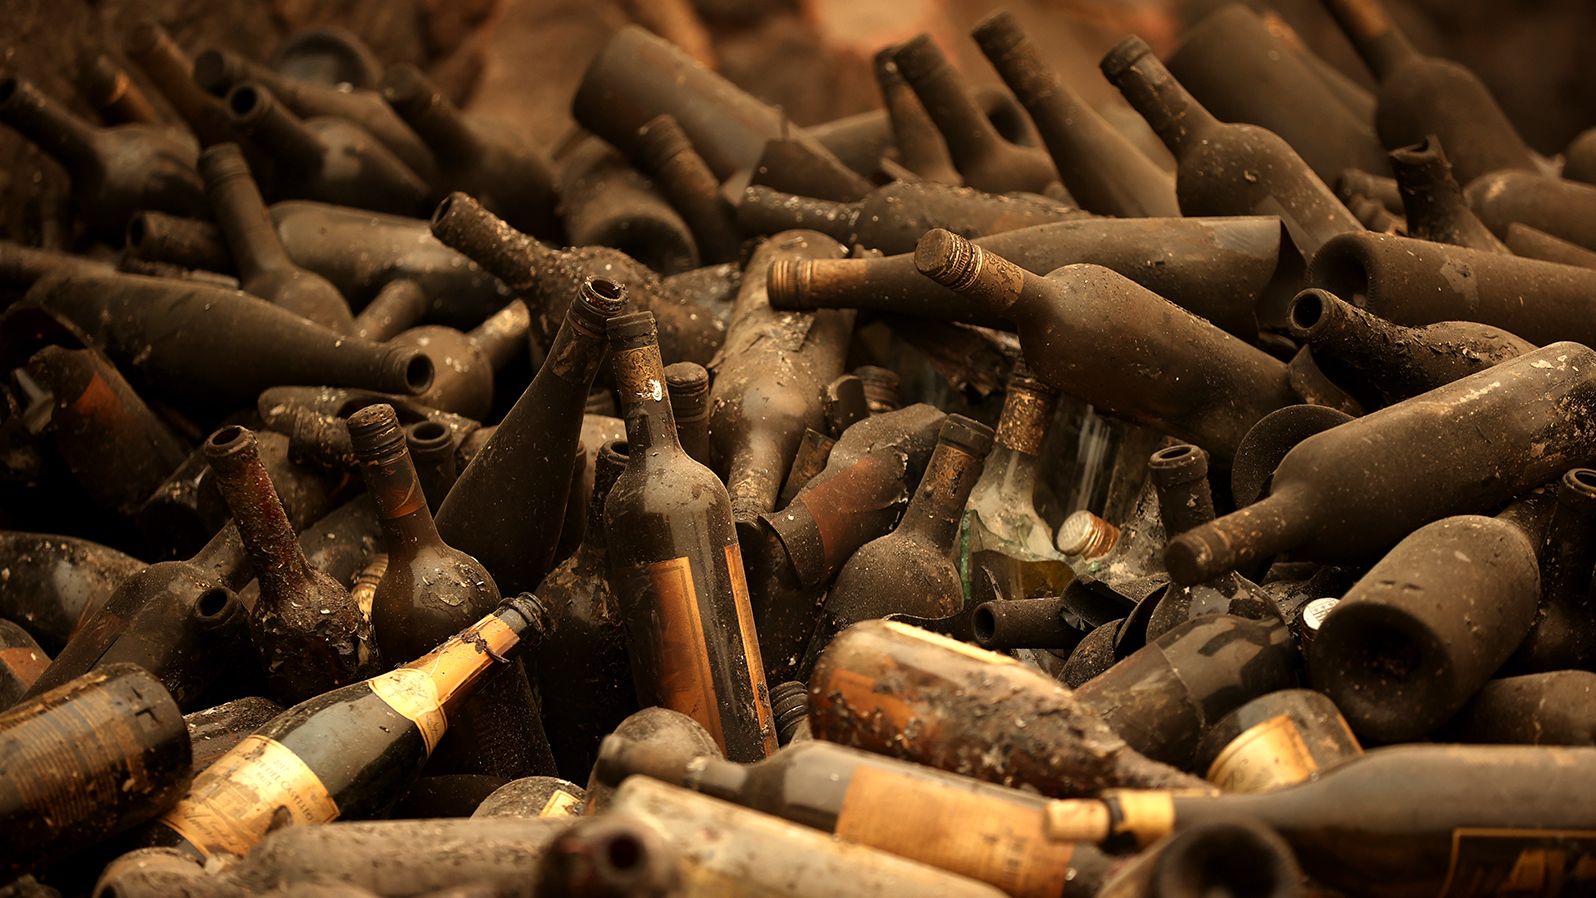 Burned bottles of wine sit in a pile at the Castello di Amorosa winery, which was destroyed by the Glass Fire in Calistoga, California, on October 1, 2020. Wildfires have damaged and <a href="https://www.cnn.com/2020/10/11/us/california-wildfires-wineries/index.html" target="_blank">destroyed dozens of the region's famed wineries,</a> many of them family-owned businesses.